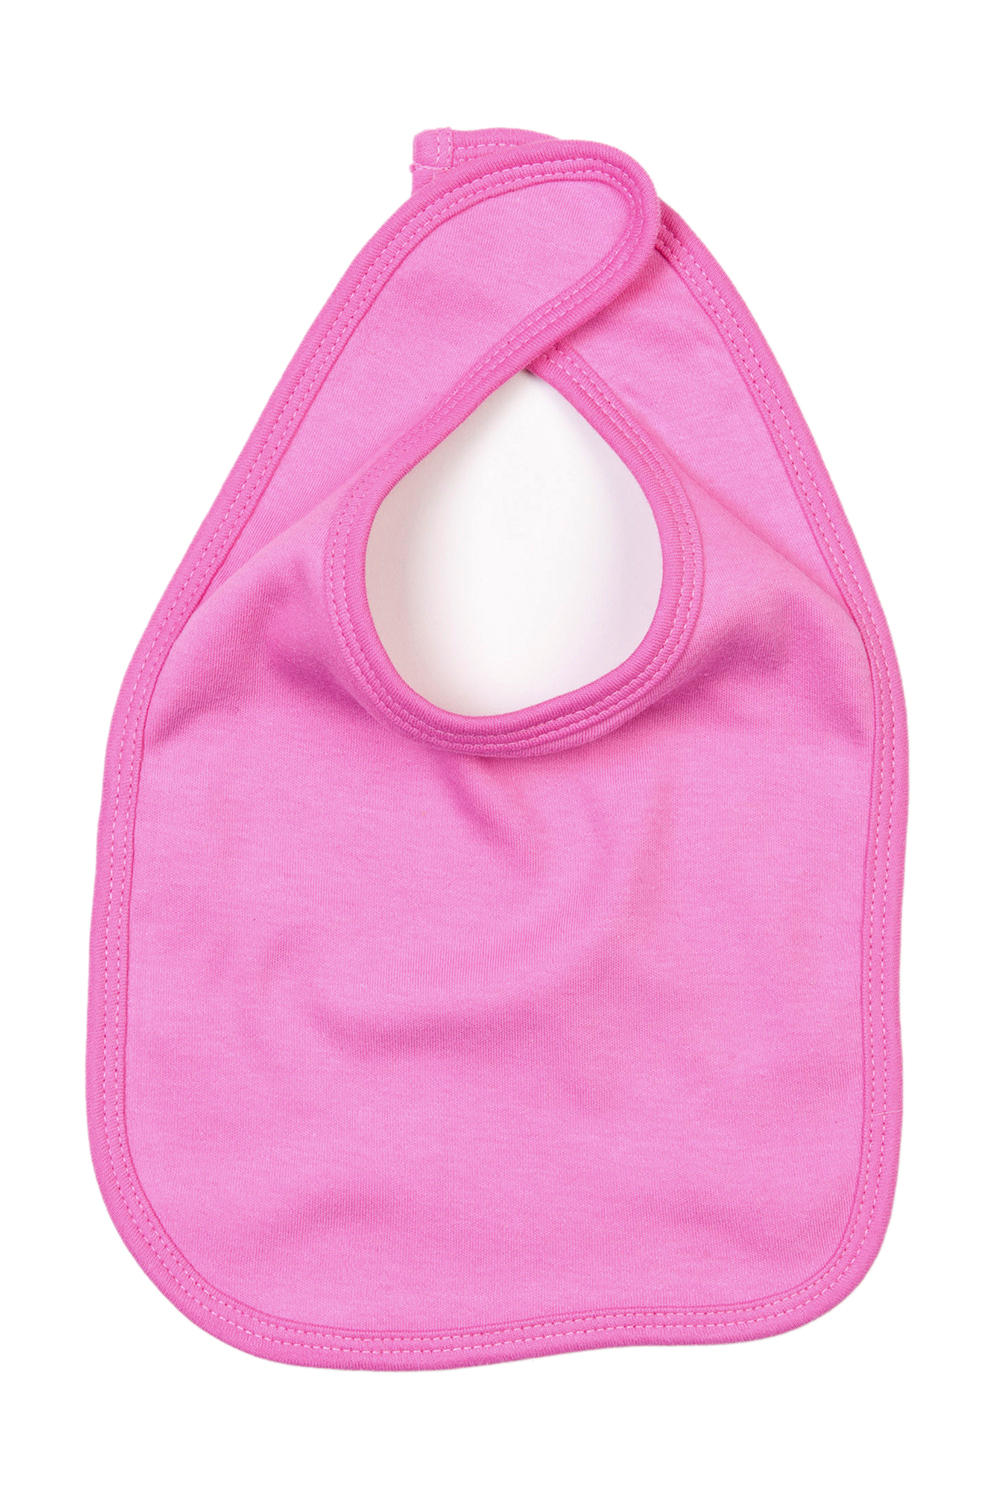  Baby Bib in Farbe Bubble Gum Pink